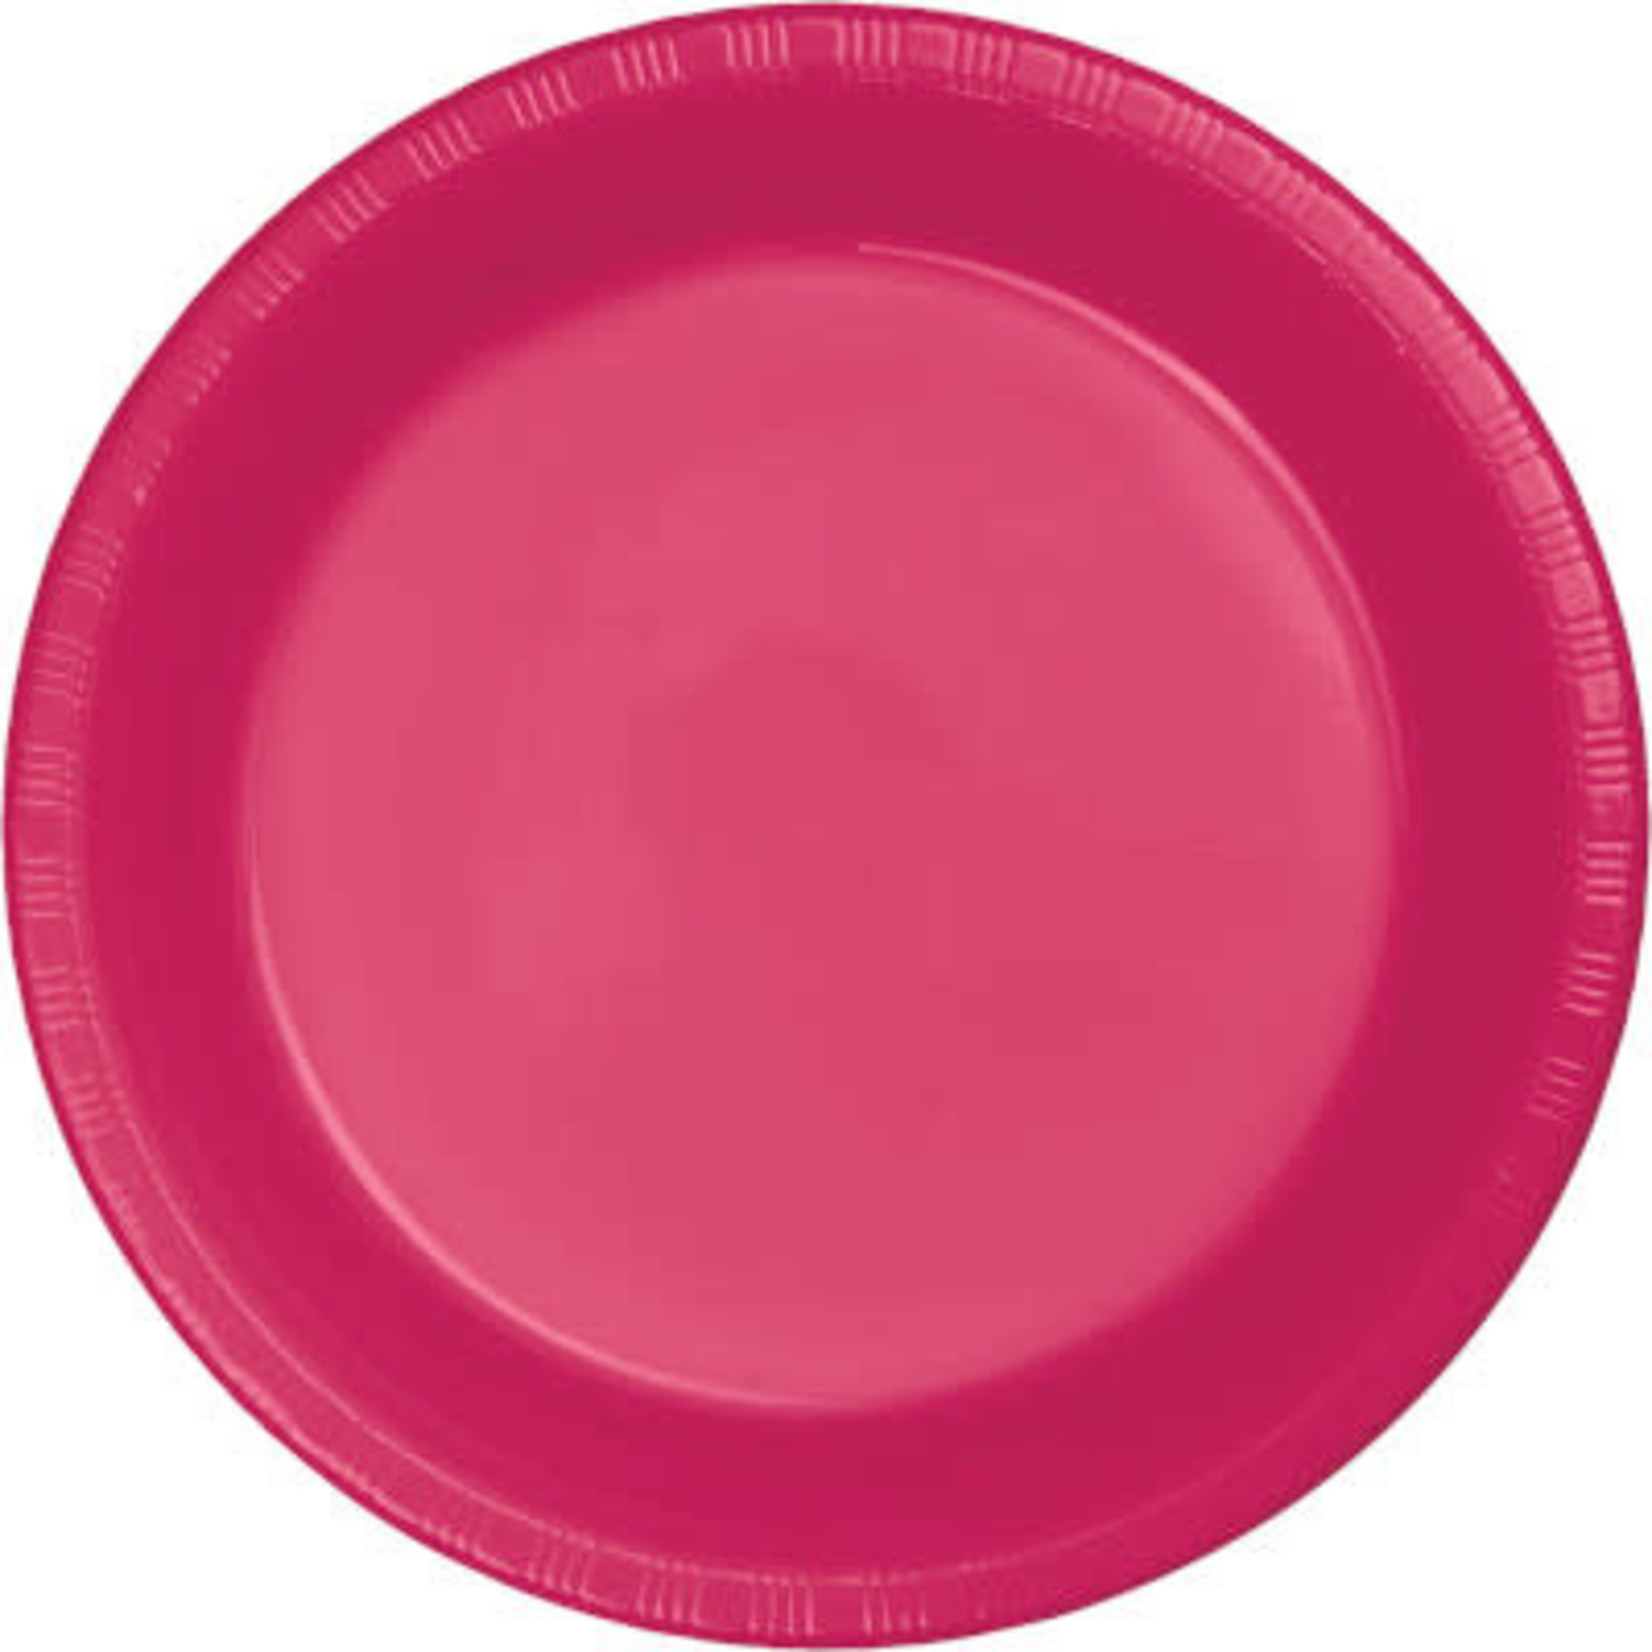 Touch of Color 7" Magenta Pink Paper Plates - 24ct.